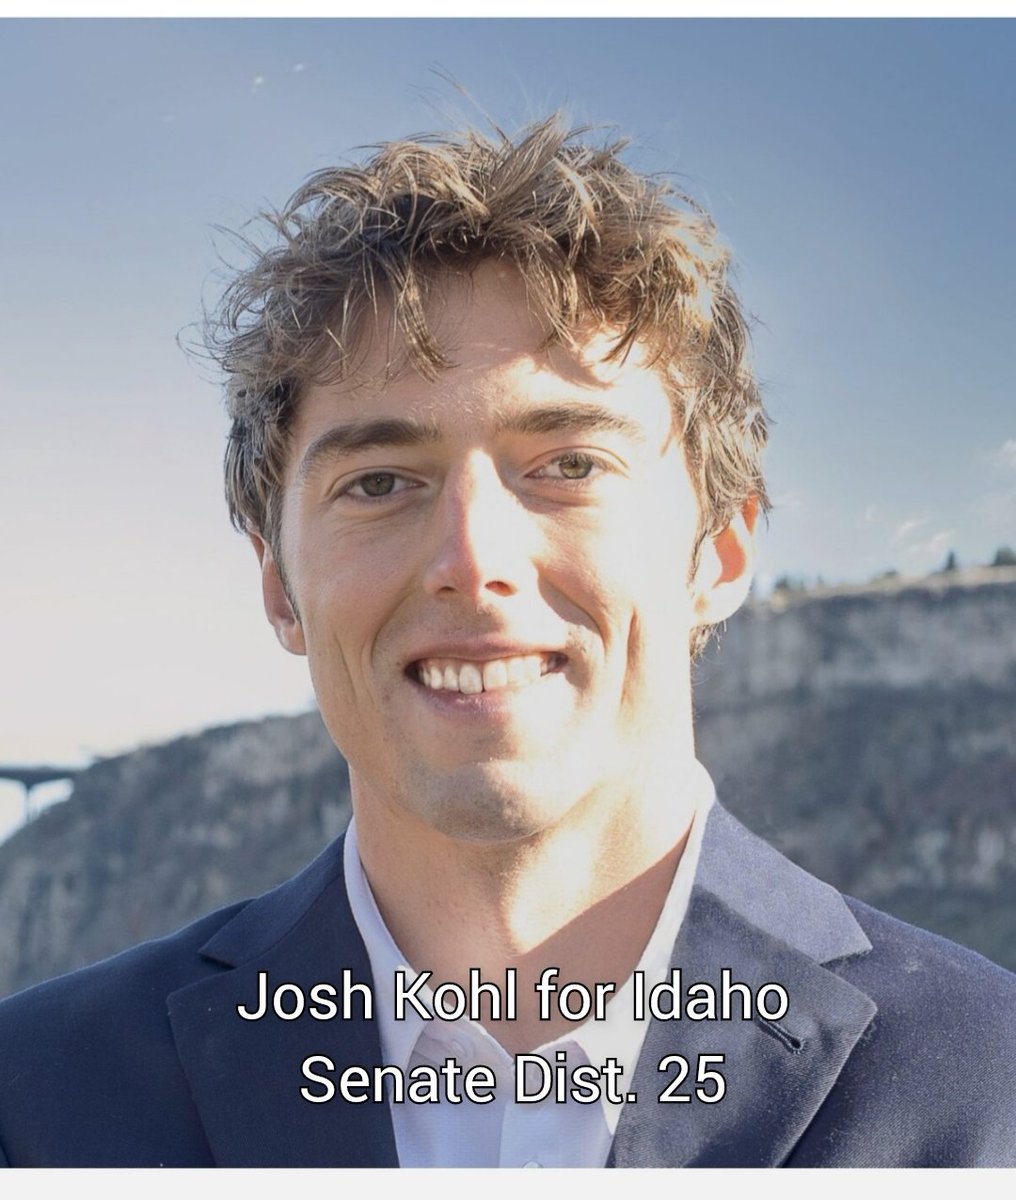 kohl4idaho.com I know Josh, he's not impulse or careless. He doesn't get caught up in trendy emotional politics. Educated, intelligent, kind, and tough on big government eating through your wealth. @kohl4idaho Retire leftist Hartgen, enough already.